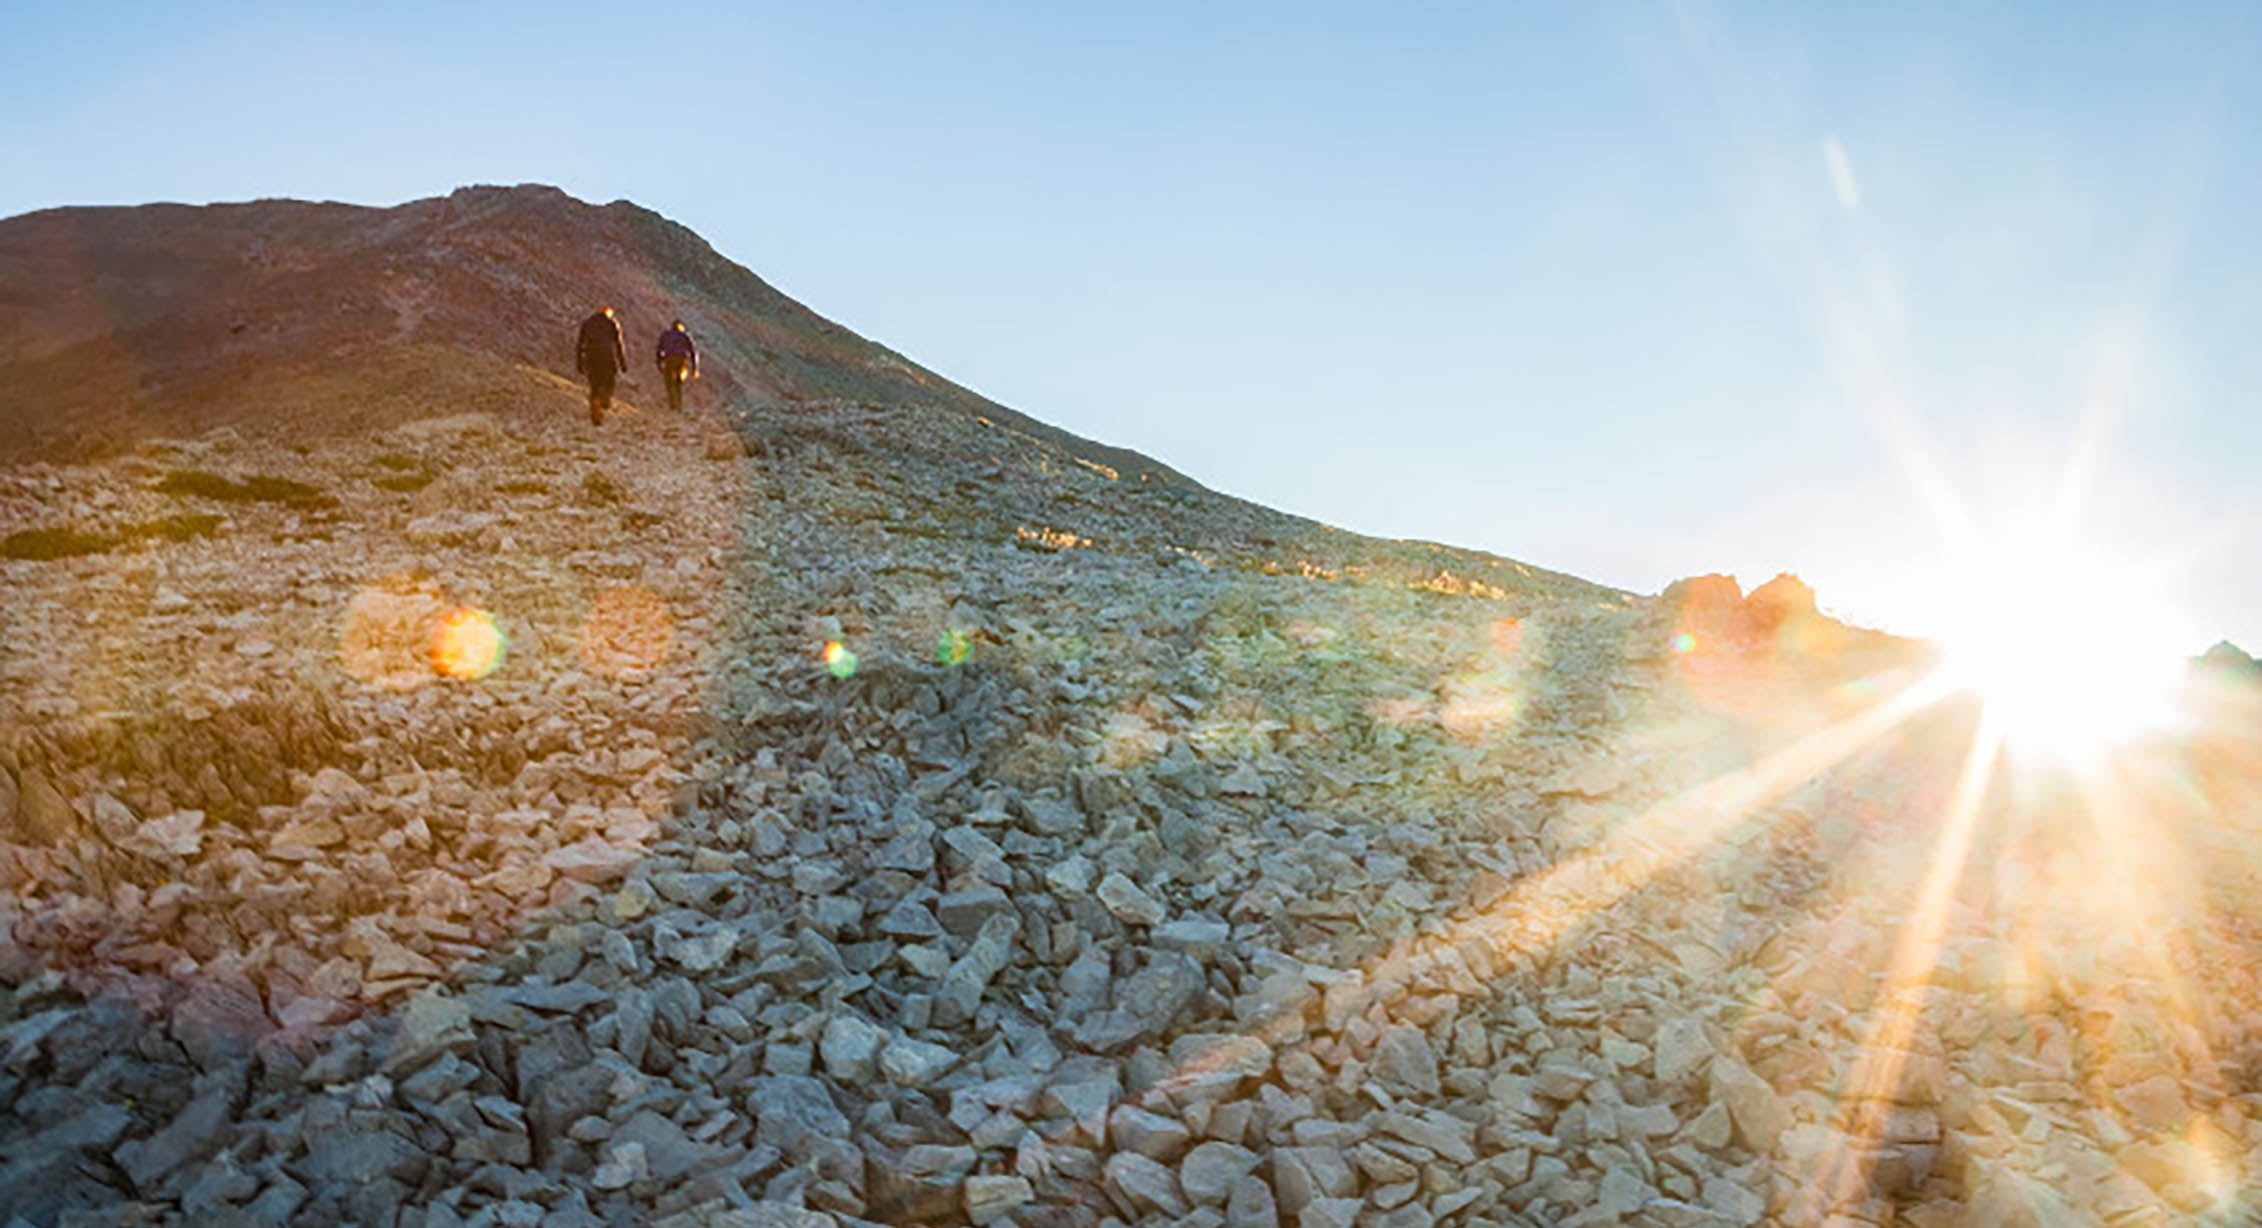 two hikers make their way across a scree field